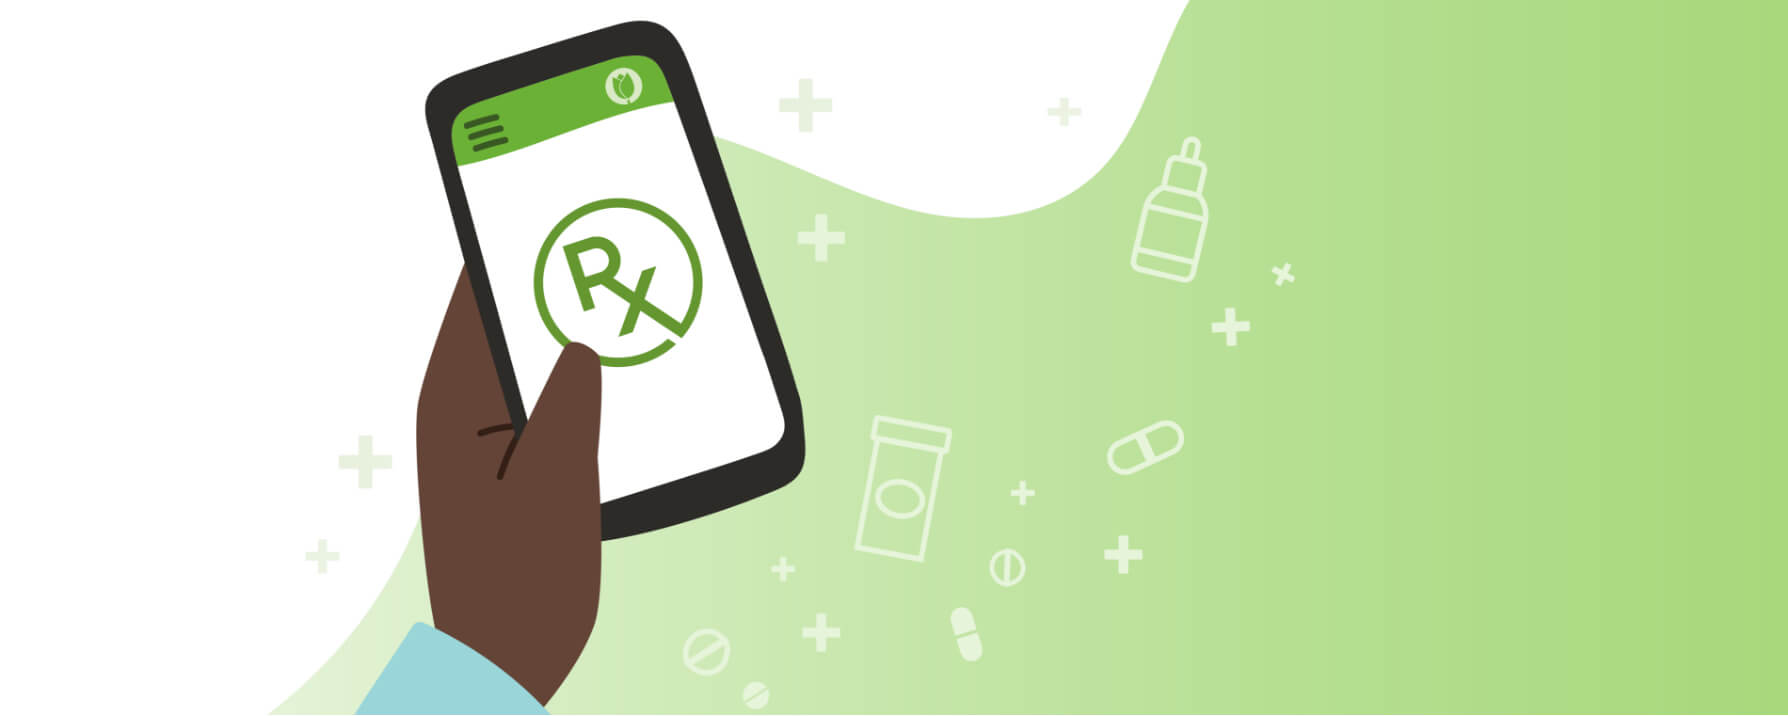 icon of person holding phone that displays Rx on the
          screen